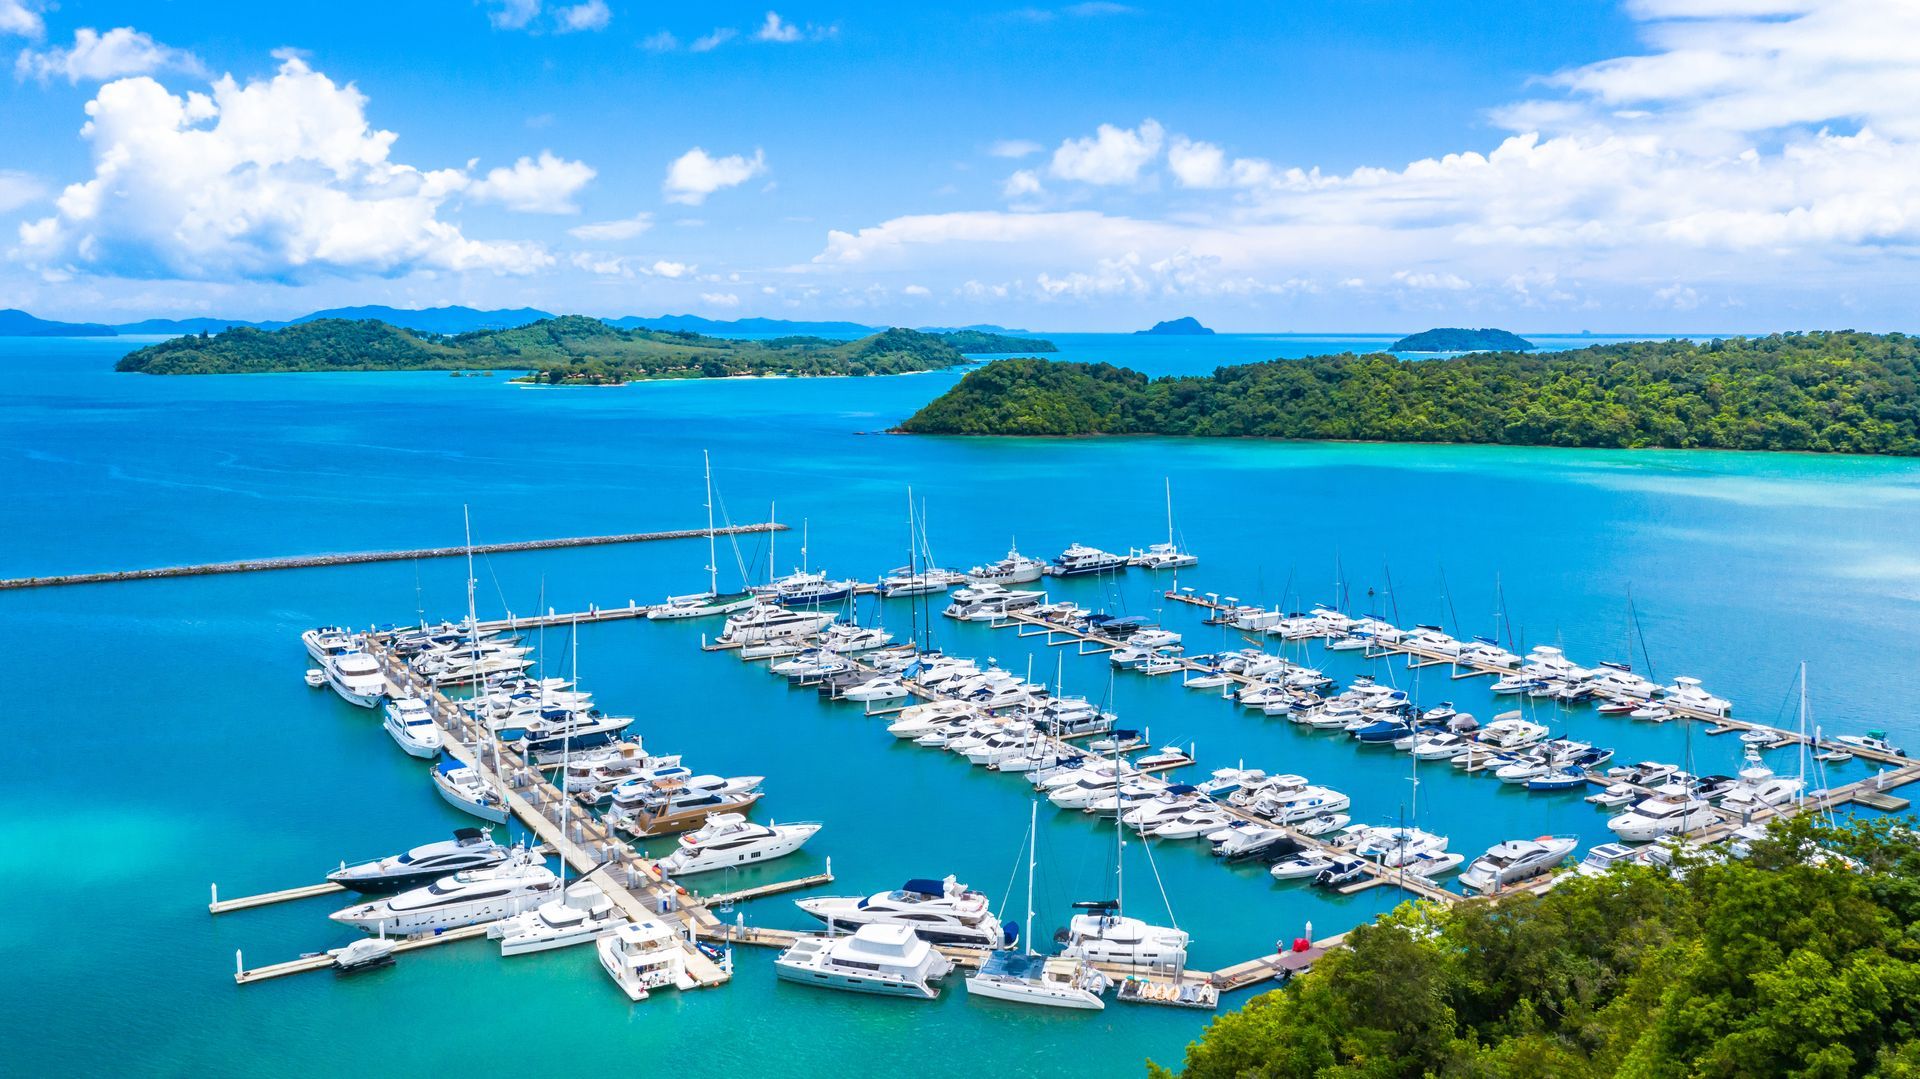 Beautiful port yachts and boats in marina bay with bulk internet and managed wifi, Aerial view of yachts and boat in the marina clear water with blue sky background